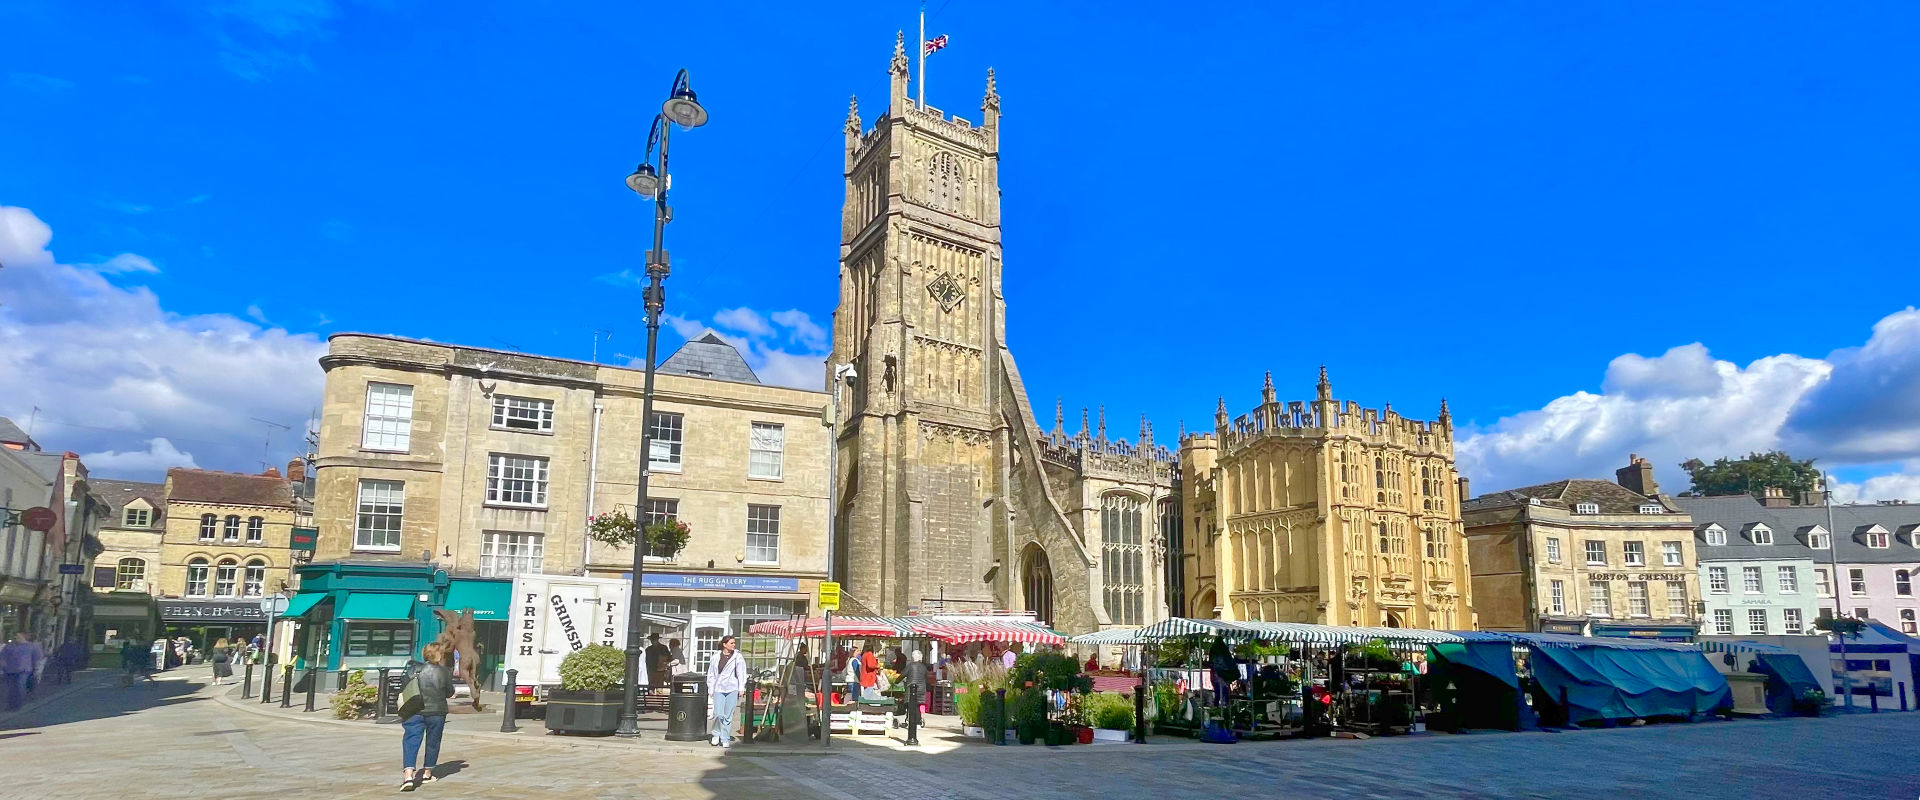 The Market Place, Cirencester